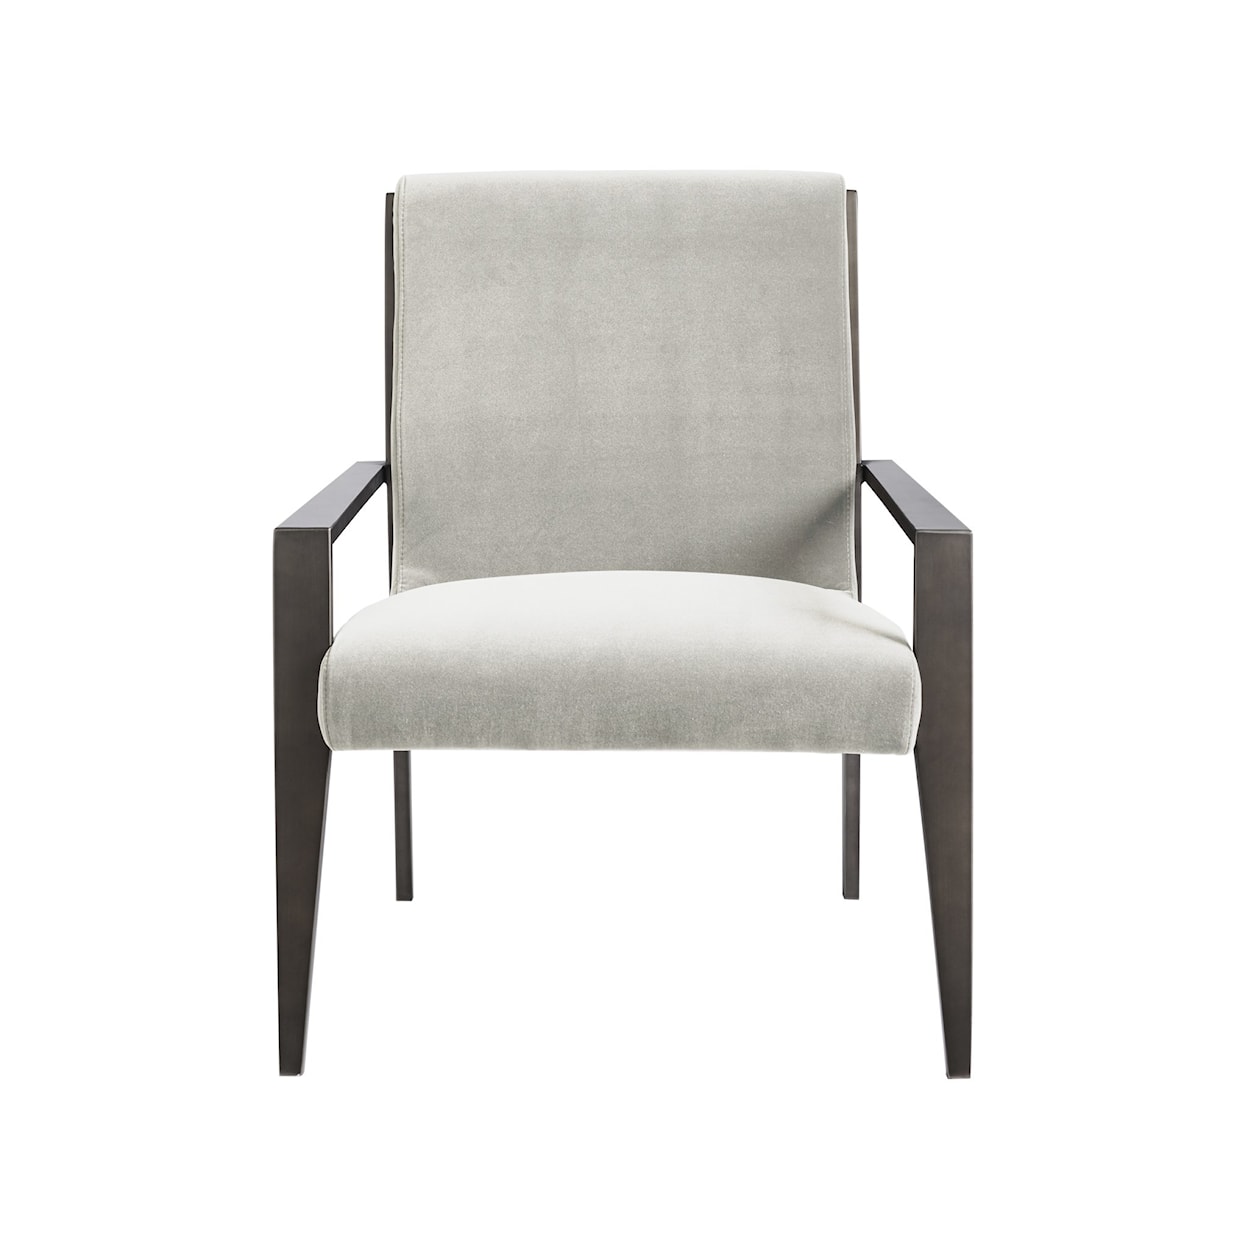 Universal Special Order Mangold Accent Chair